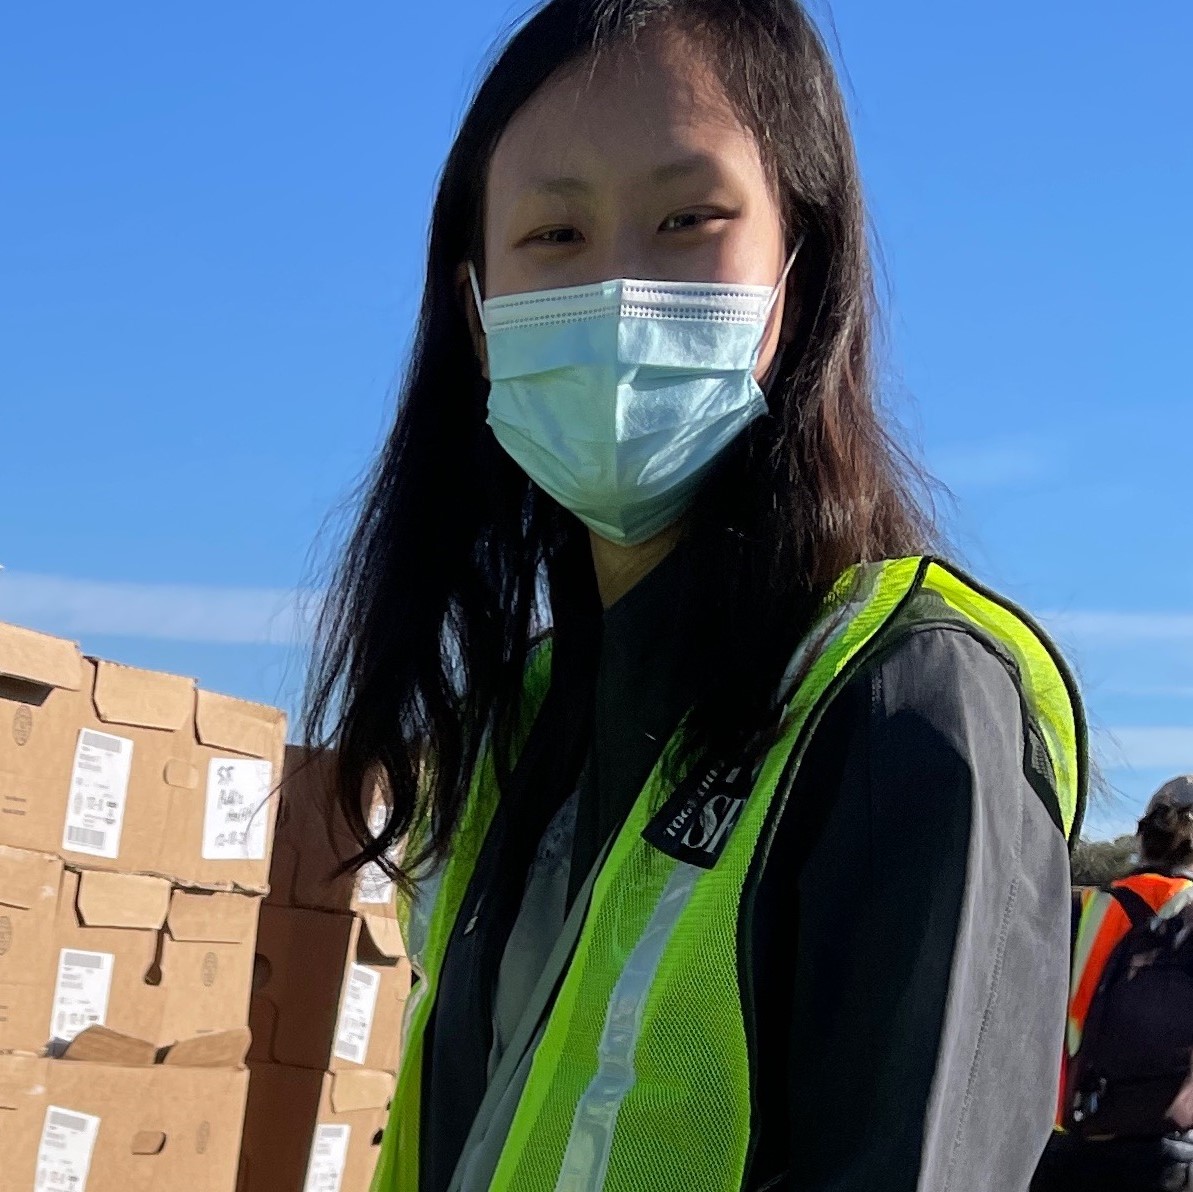 Mindy faces the camera smiling while wearing a blue facemask. She is wearing a yellow volunteer mesh jacket over her National Health Corps jacket.